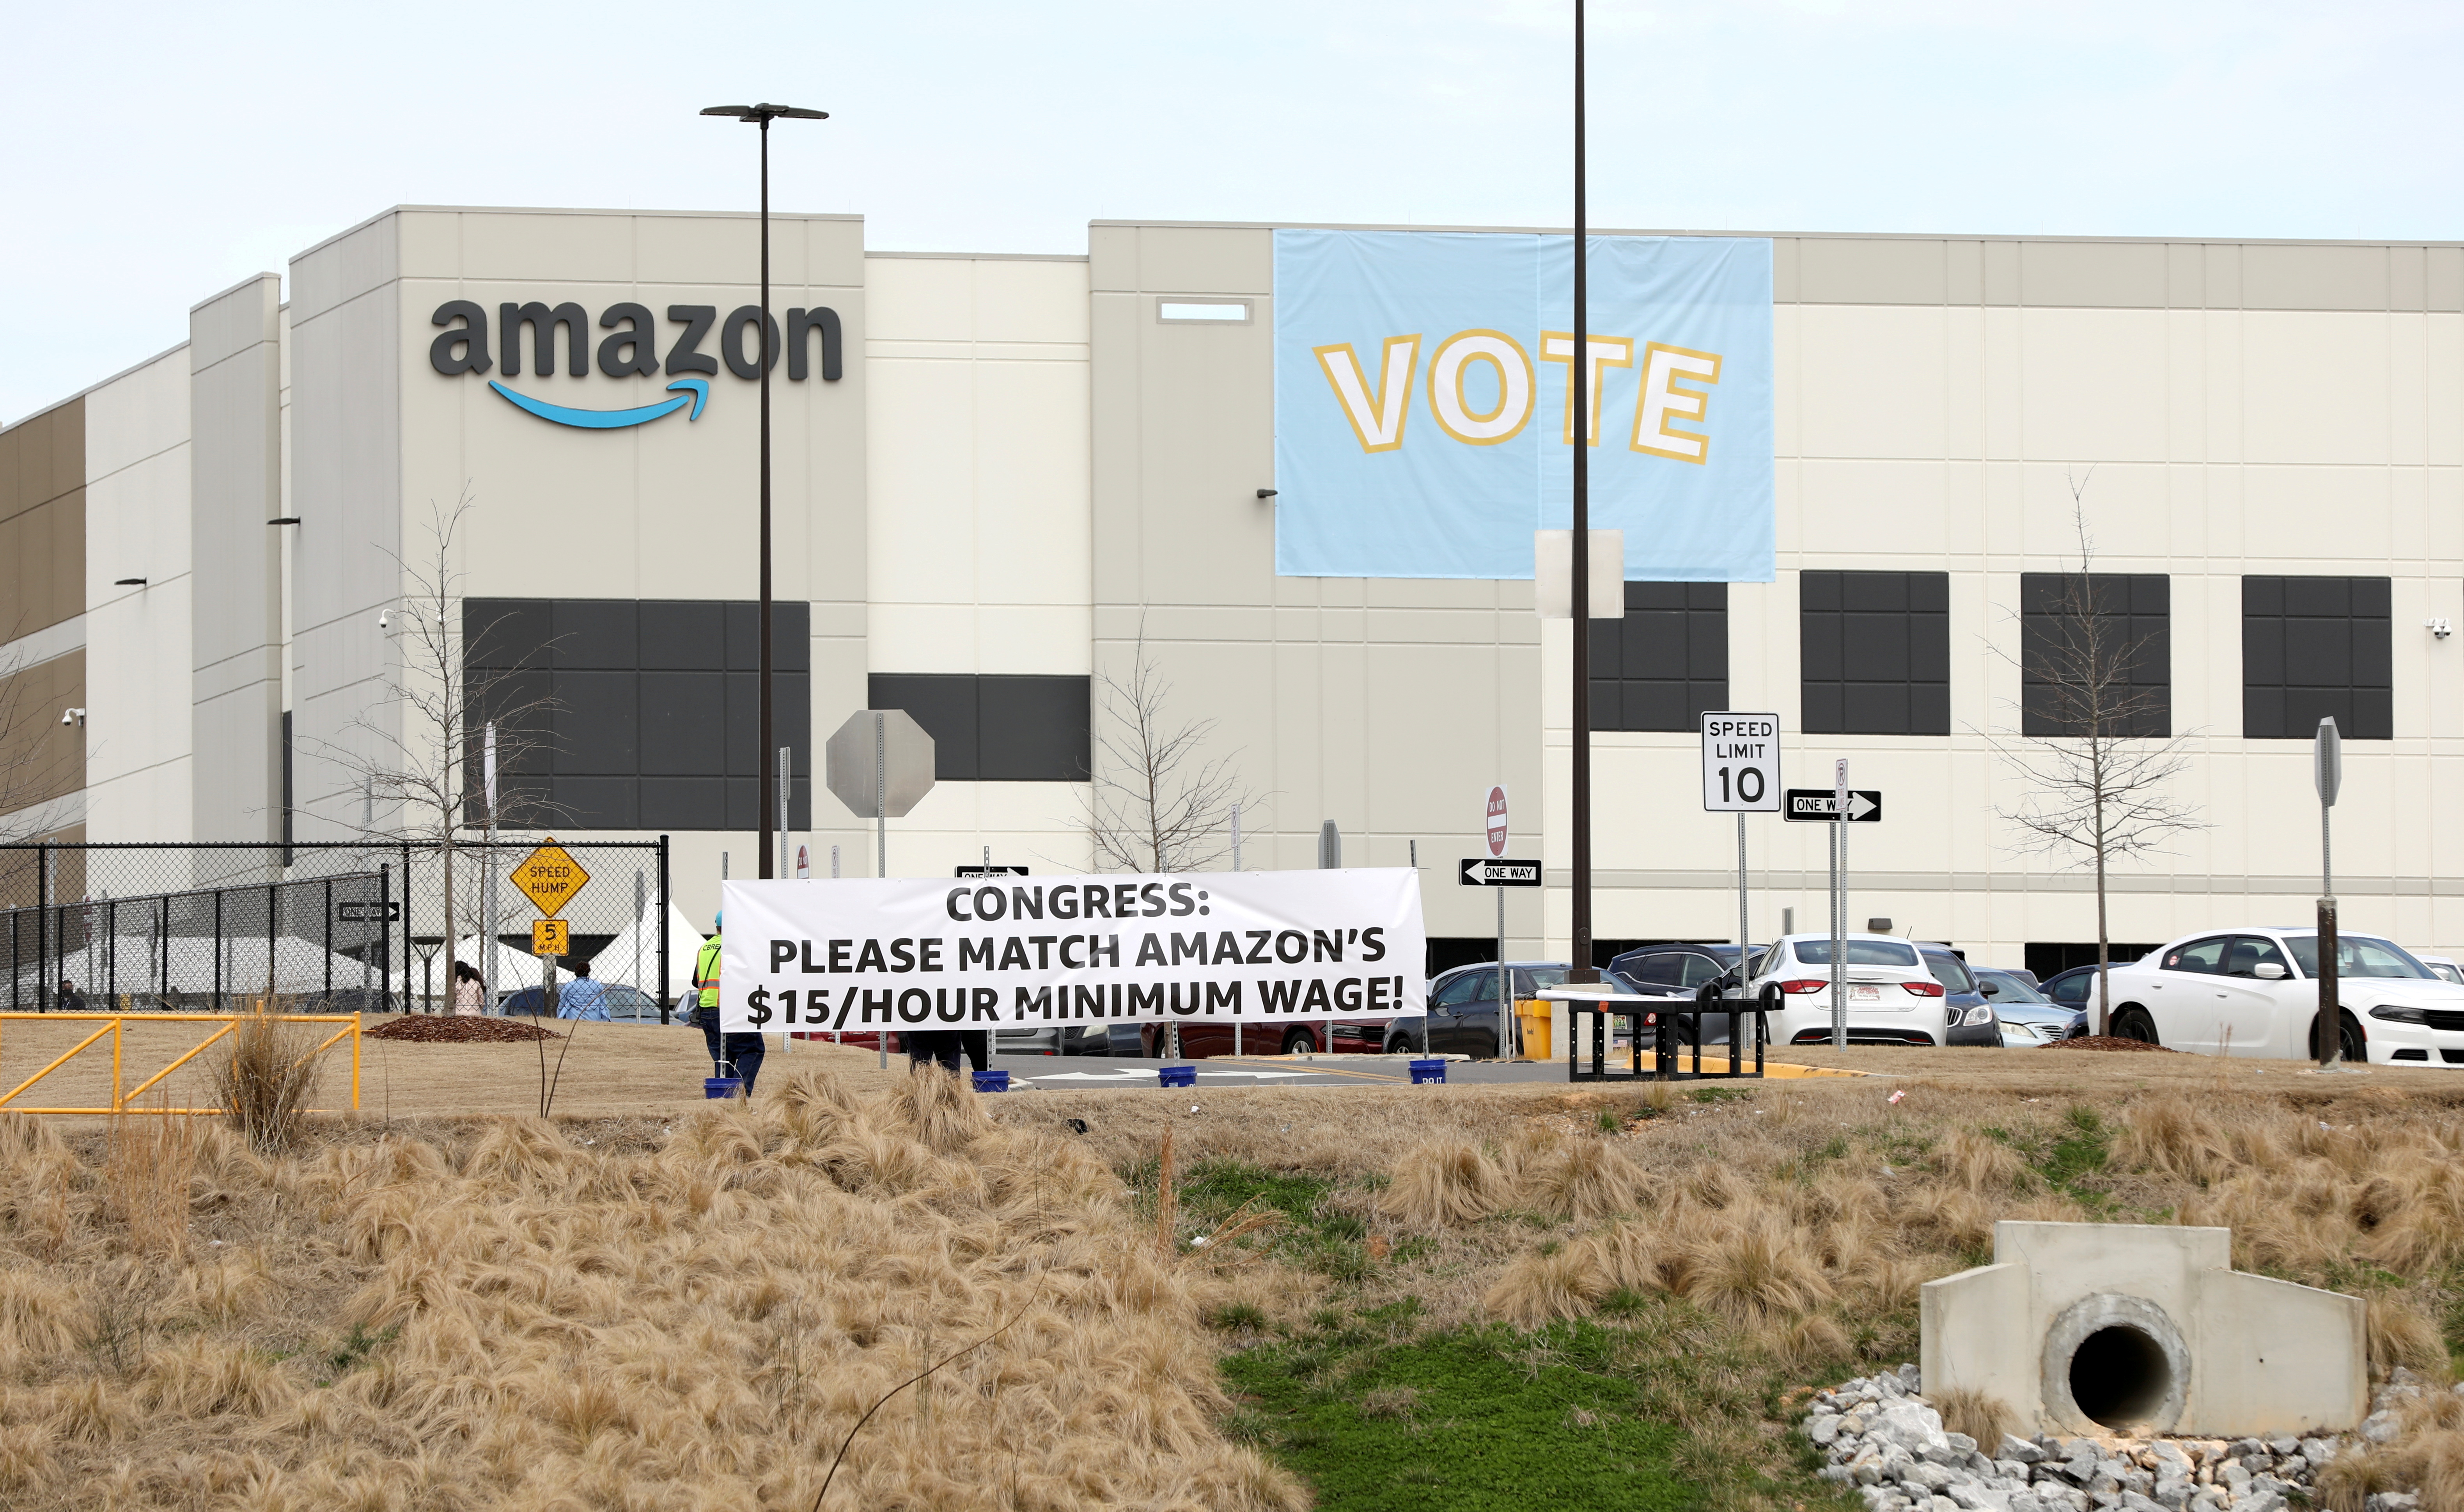 Banners are placed at the Amazon facility as members of a congressional delegation arrive to show their support for workers who will vote on whether to unionize, in Bessemer, Alabama, U.S. March 5, 2021.  REUTERS/Dustin Chambers